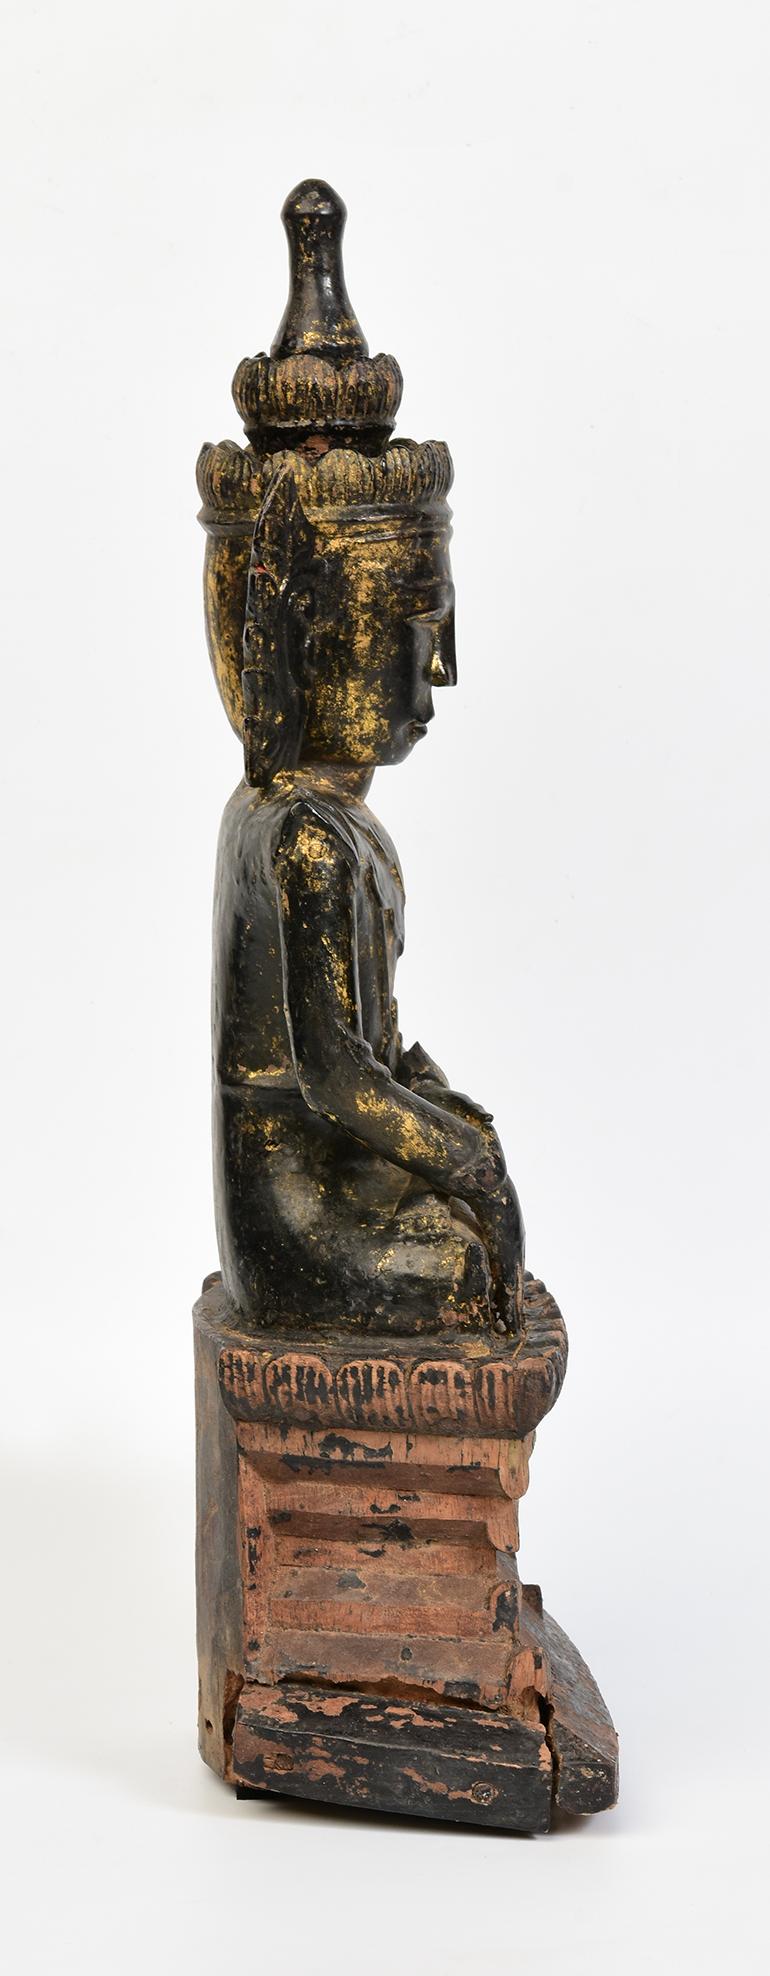 18th Century, Shan, Antique Burmese Wooden Seated Crowned Buddha For Sale 5